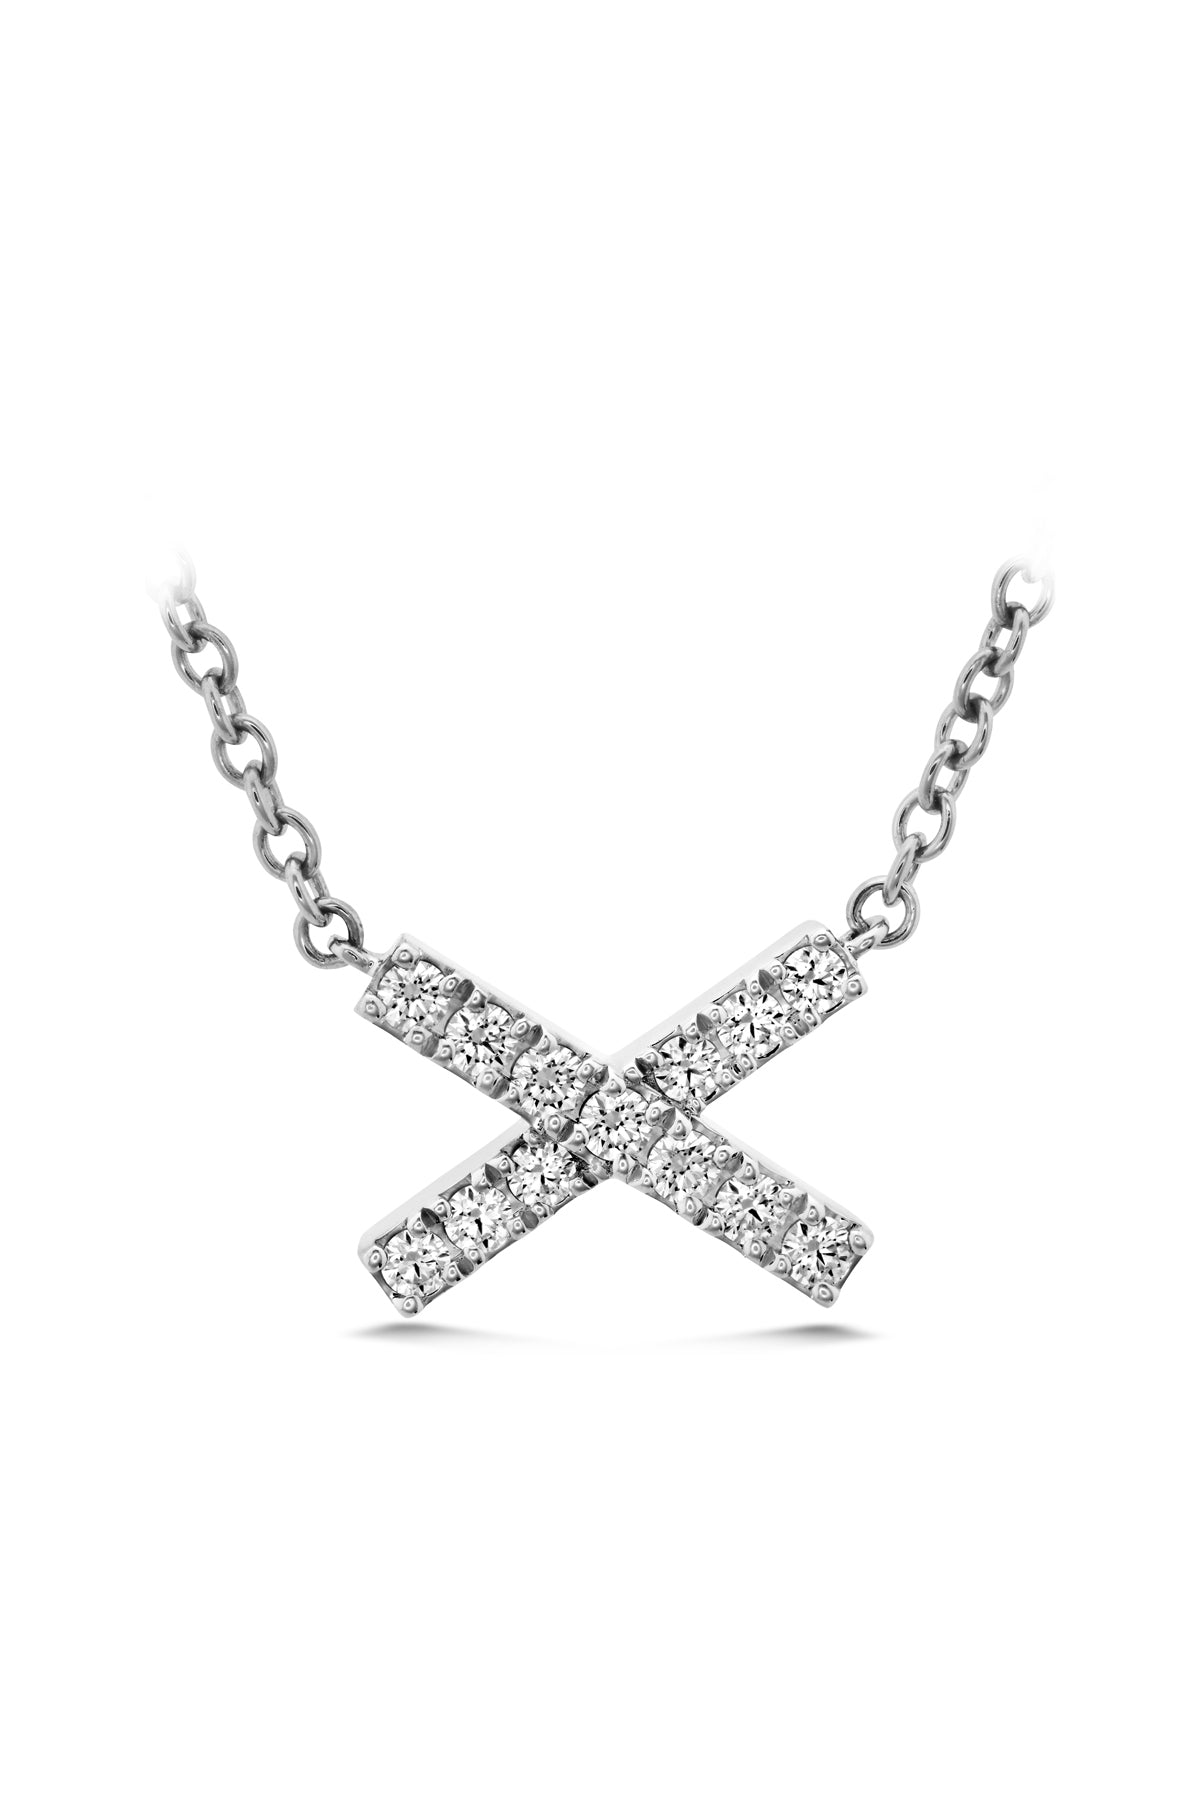 Charmed X Pendant From Hearts On Fire available at LeGassick Diamonds and Jewellery Gold Coast, Australia.